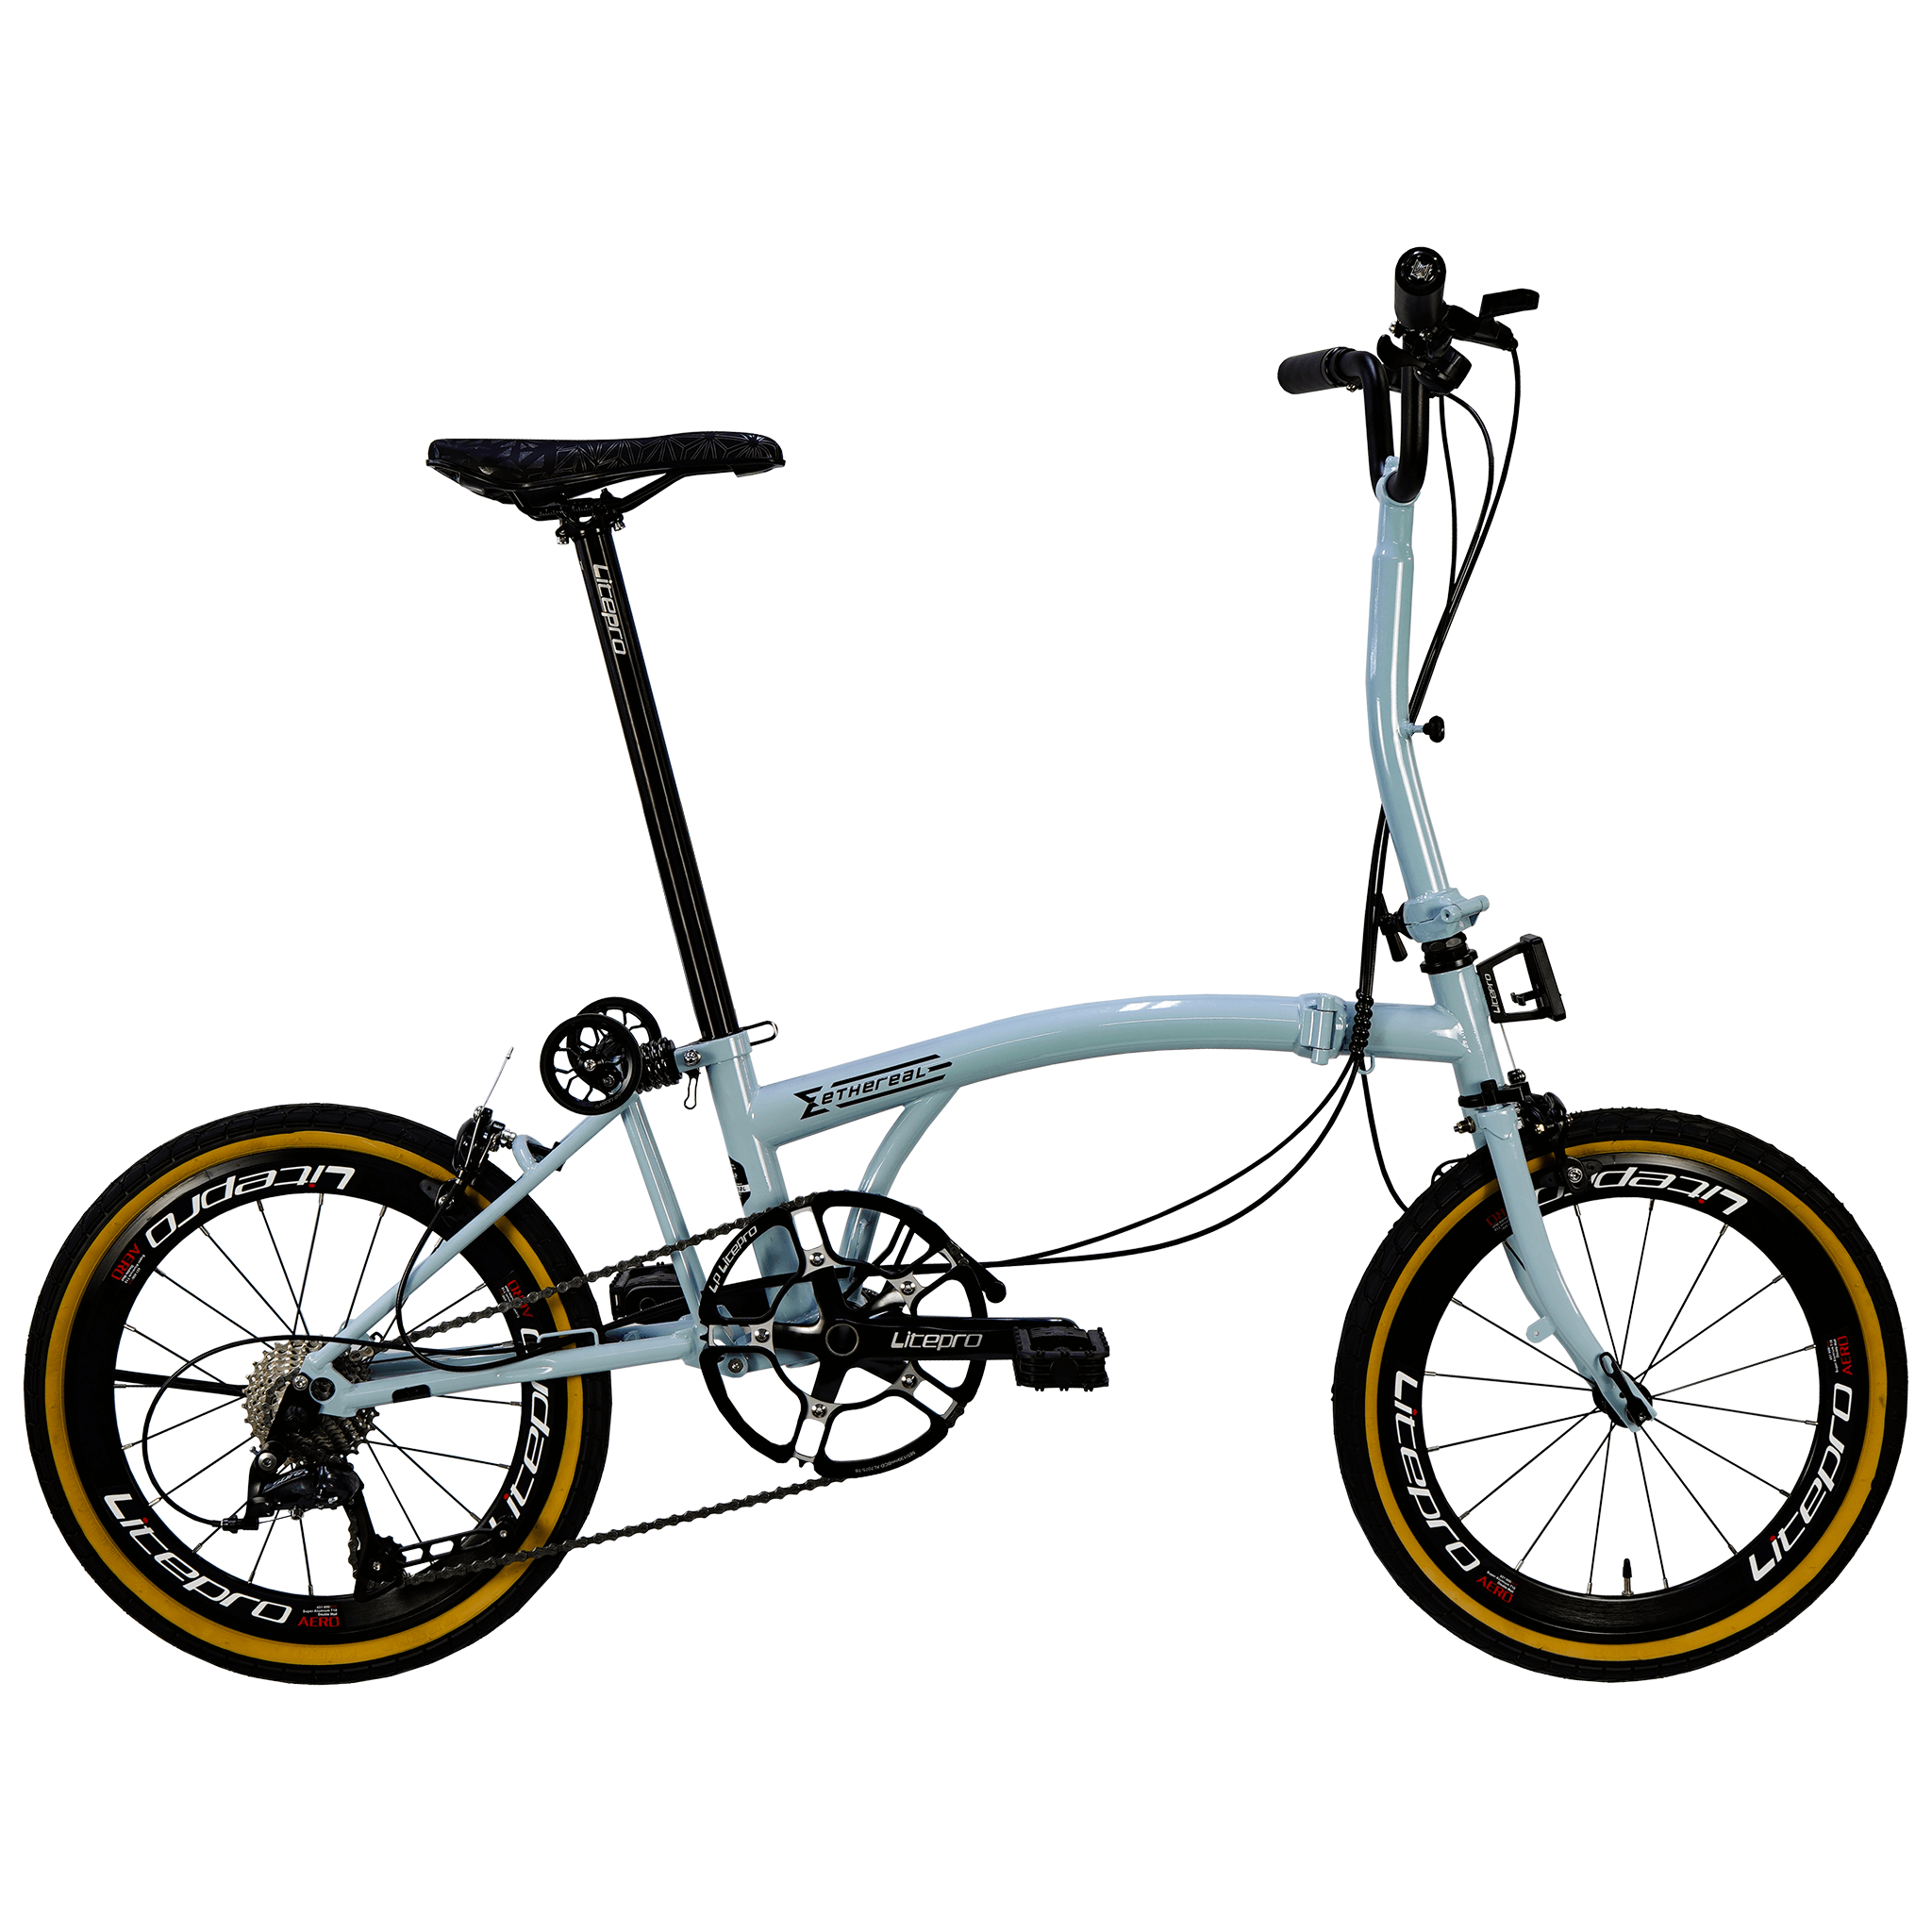 Foldable 20-inch trifold bicycle with Shimano Sora 9 speed, Kenda tires, Litepro Quad Bearing wheelset, and ergonomic cushion saddle - Ethereal G20 Trifold by The Bike Atrium - The Best Bicycle Shop in Singapore